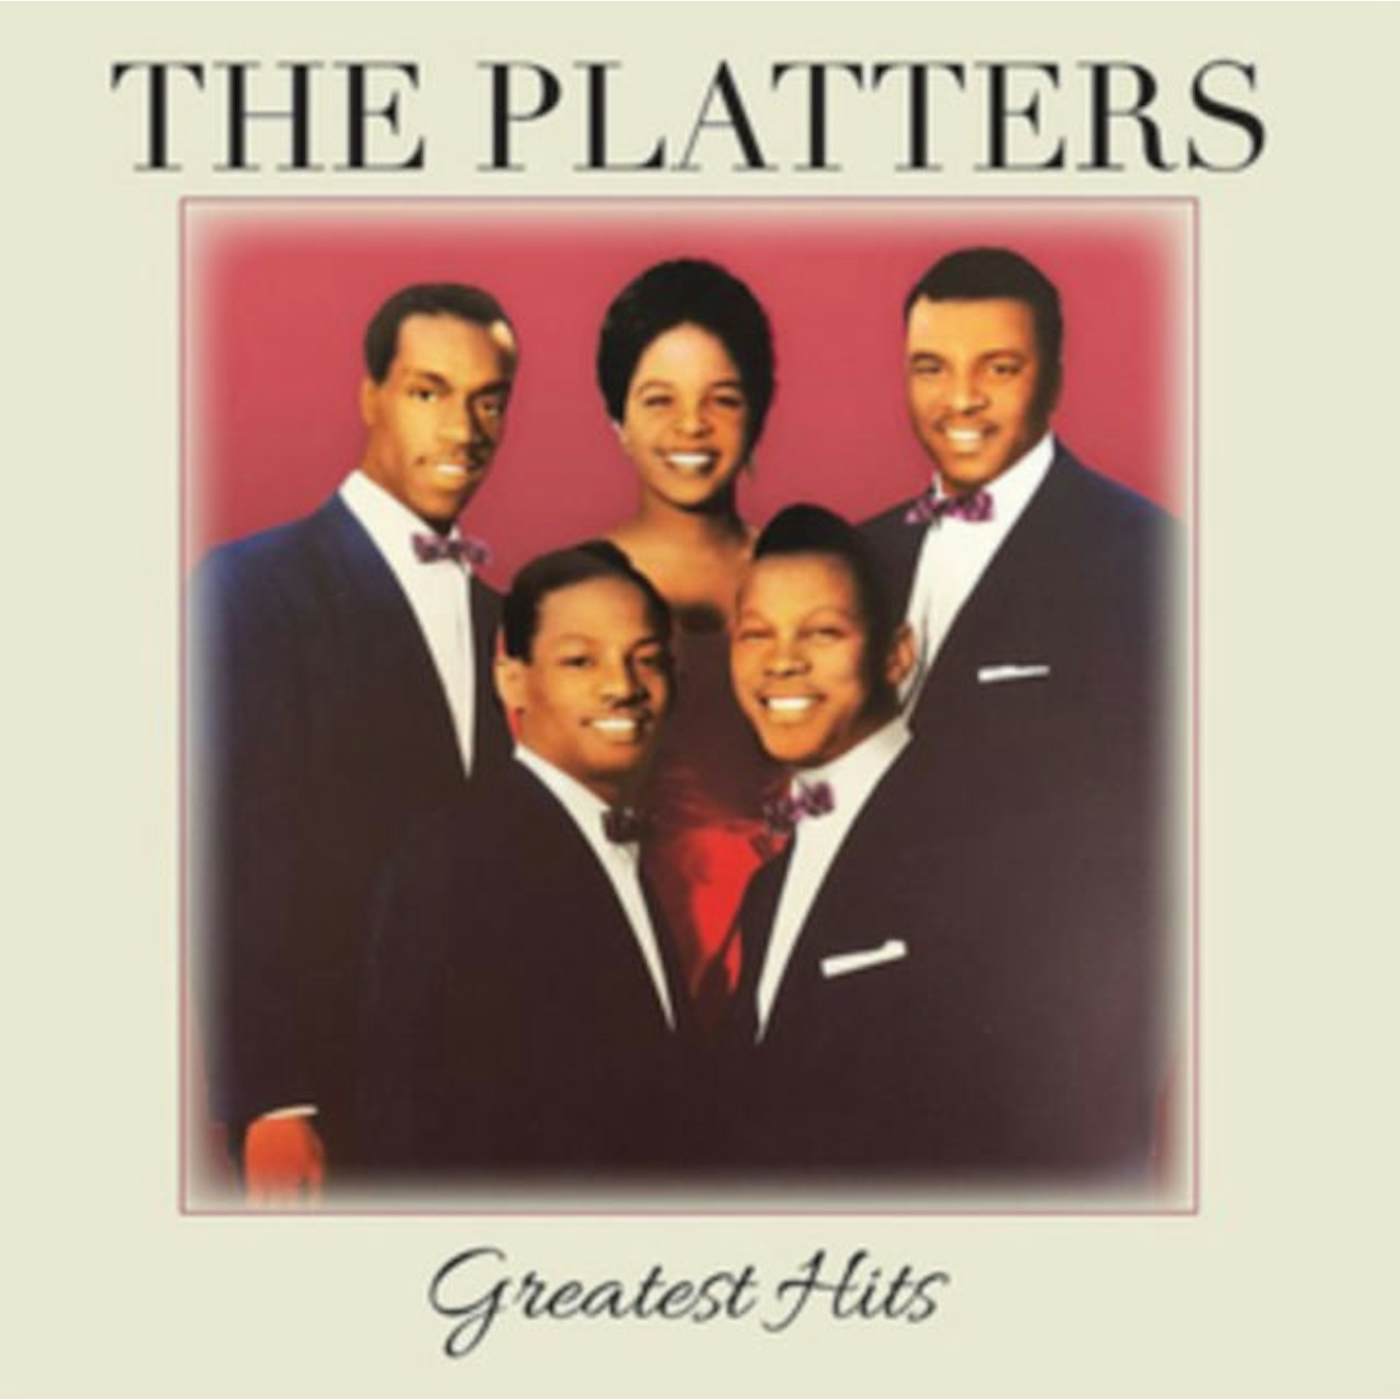 The Platters CD - Greatest Hits